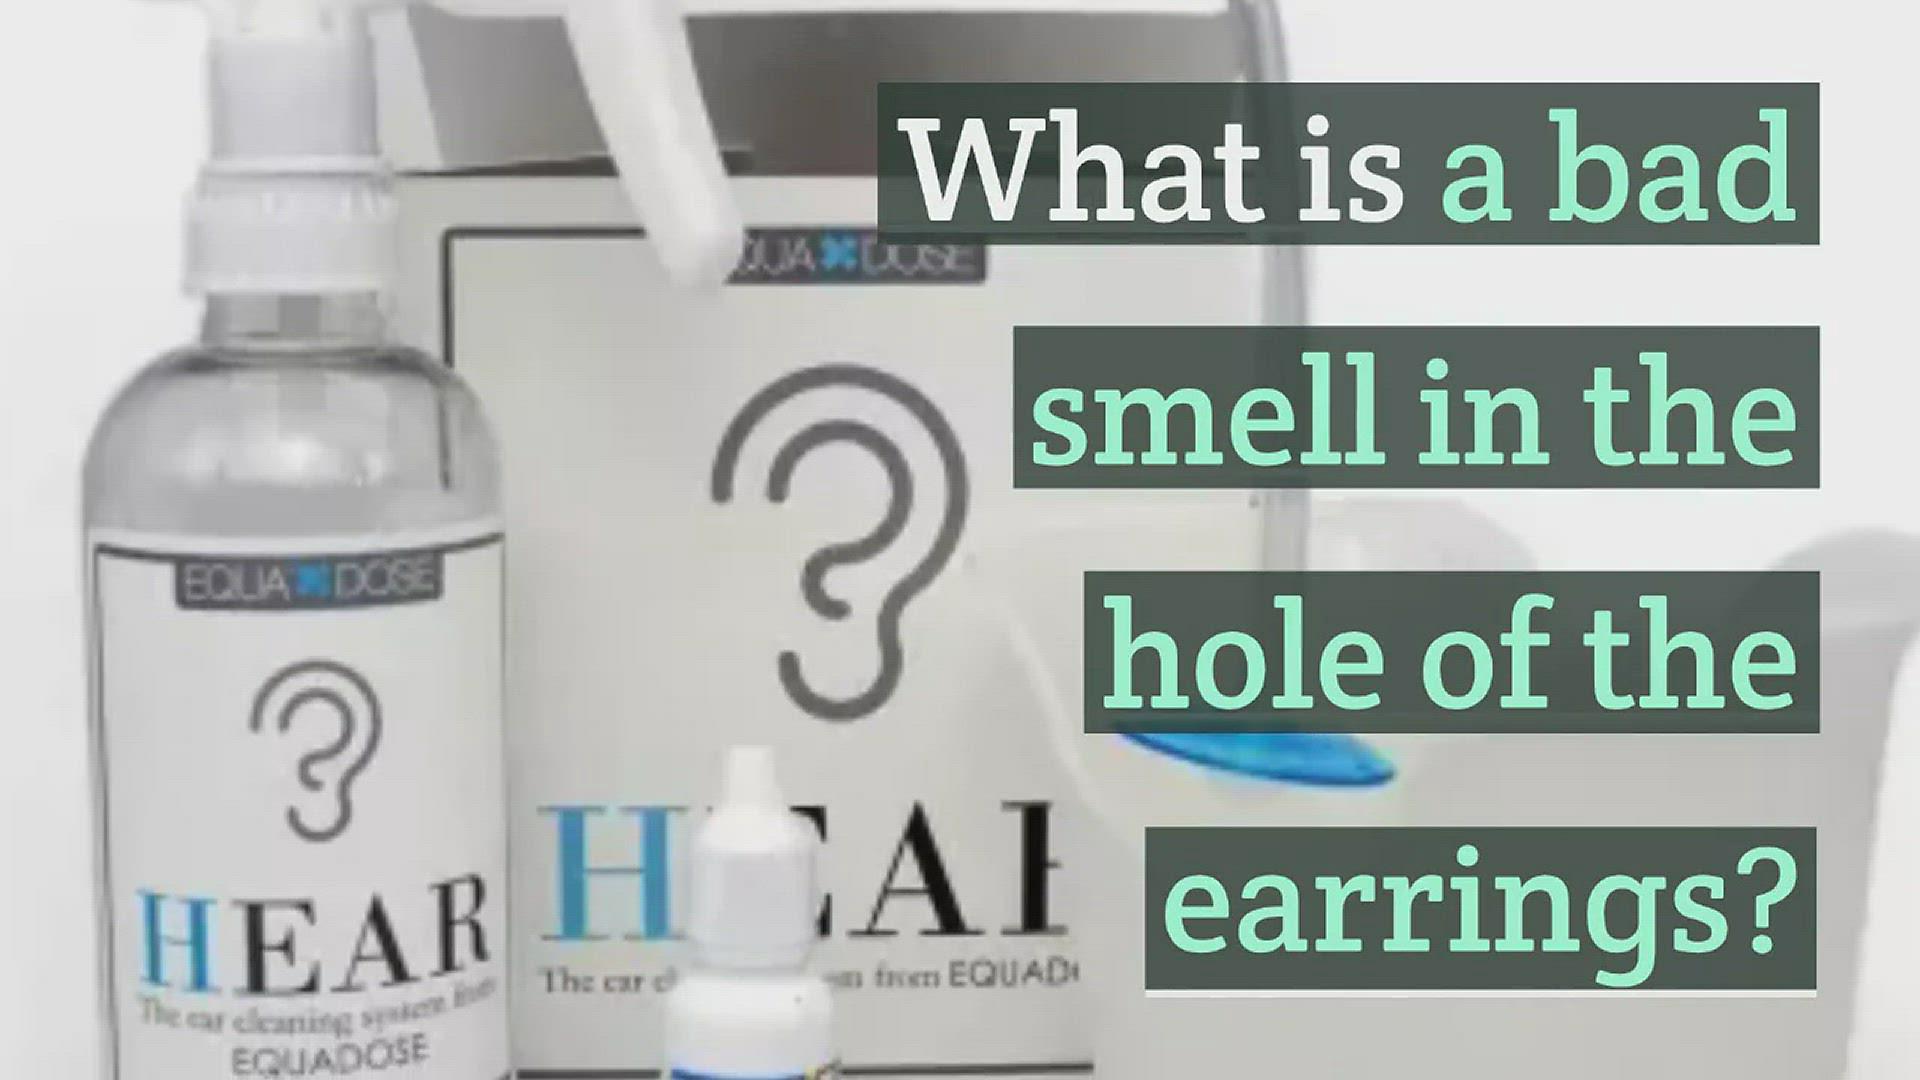 'Video thumbnail for What is a bad smell in the hole of the earrings?'